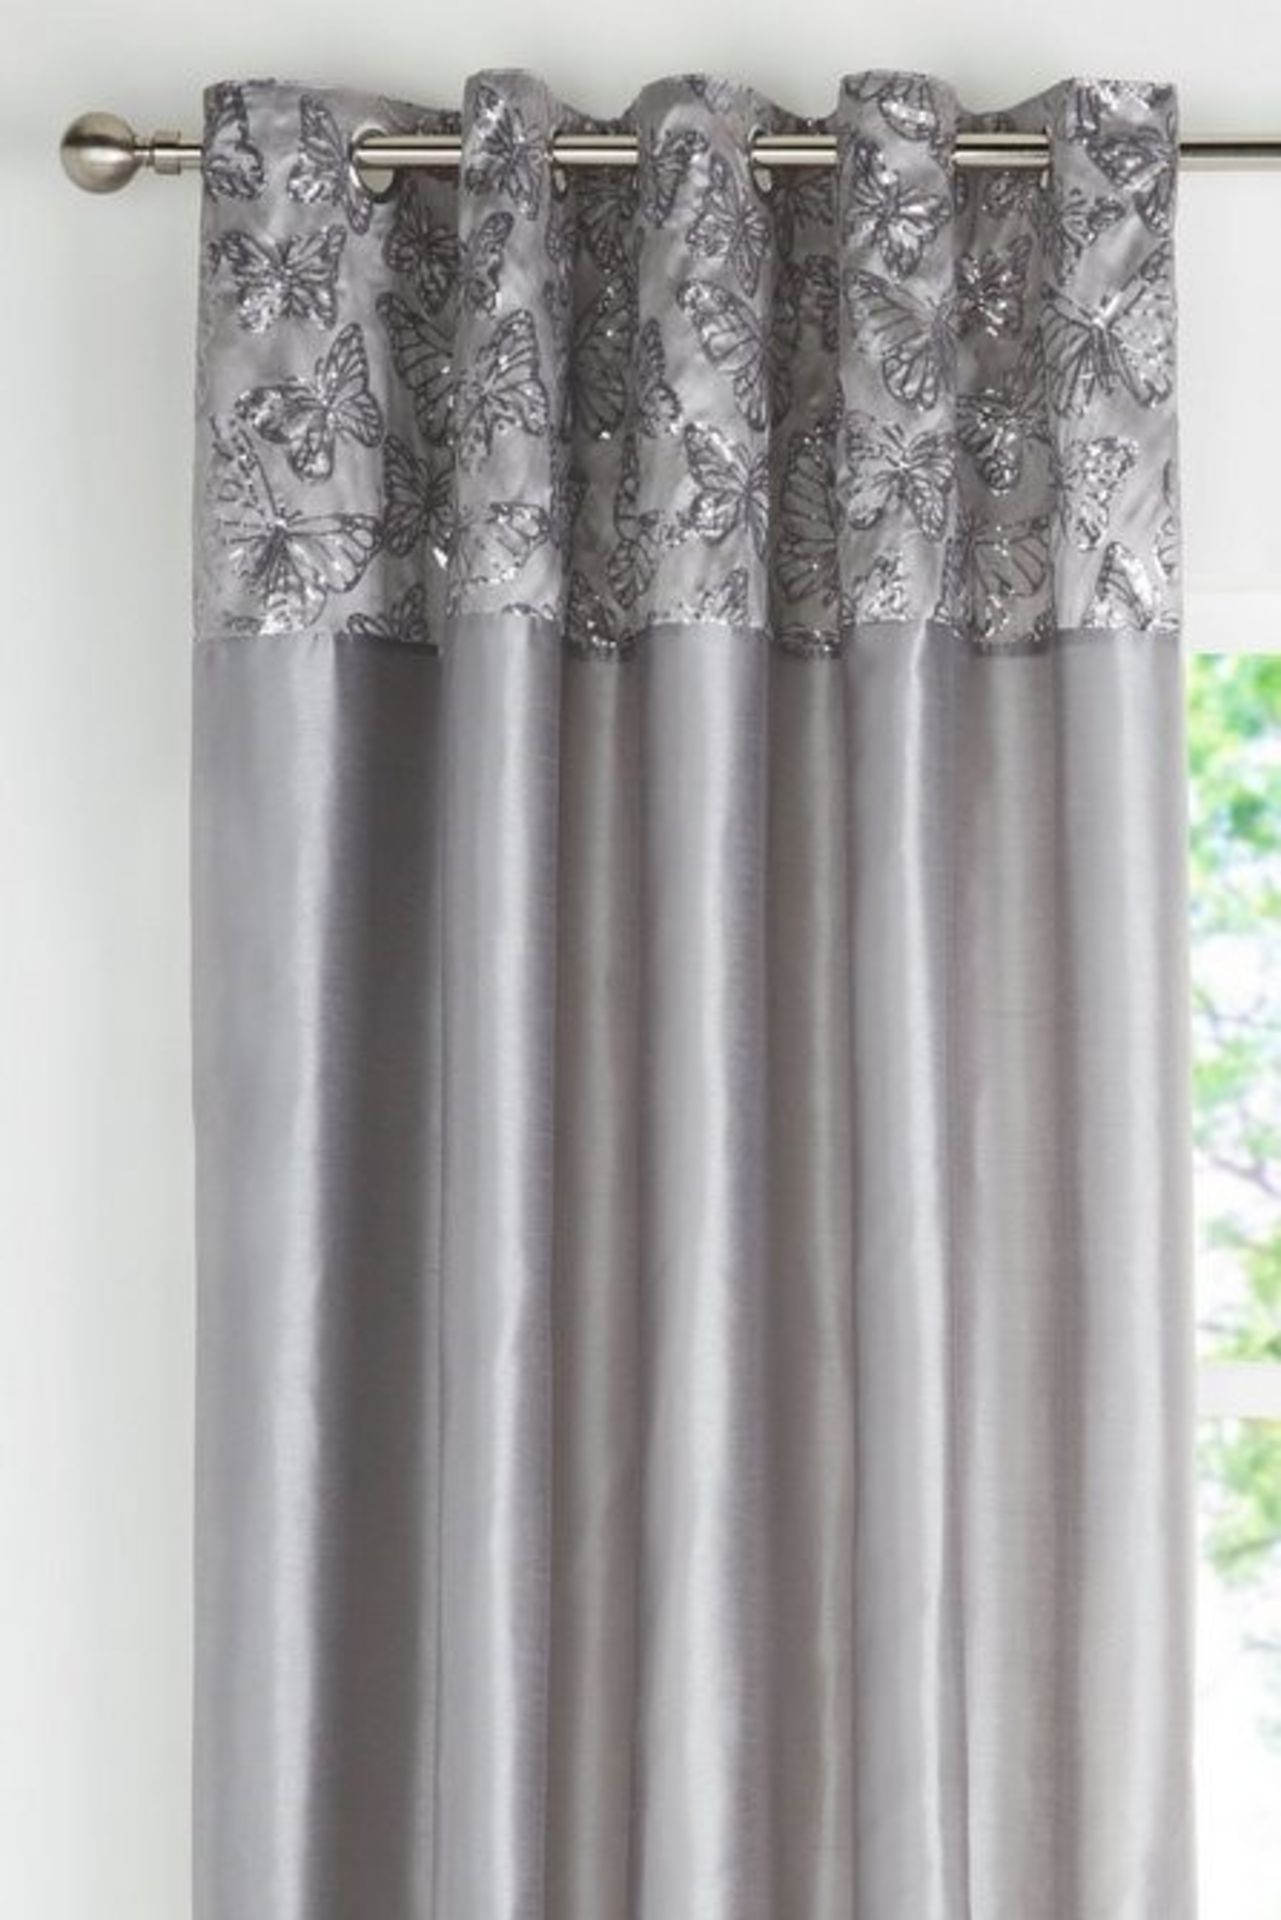 1 BAGGED BUTTERFLY SEQUIN TOP BORDER LINED EYELET CURTAINS IN CHARCOAL / RRP £49.99 (PUBLIC